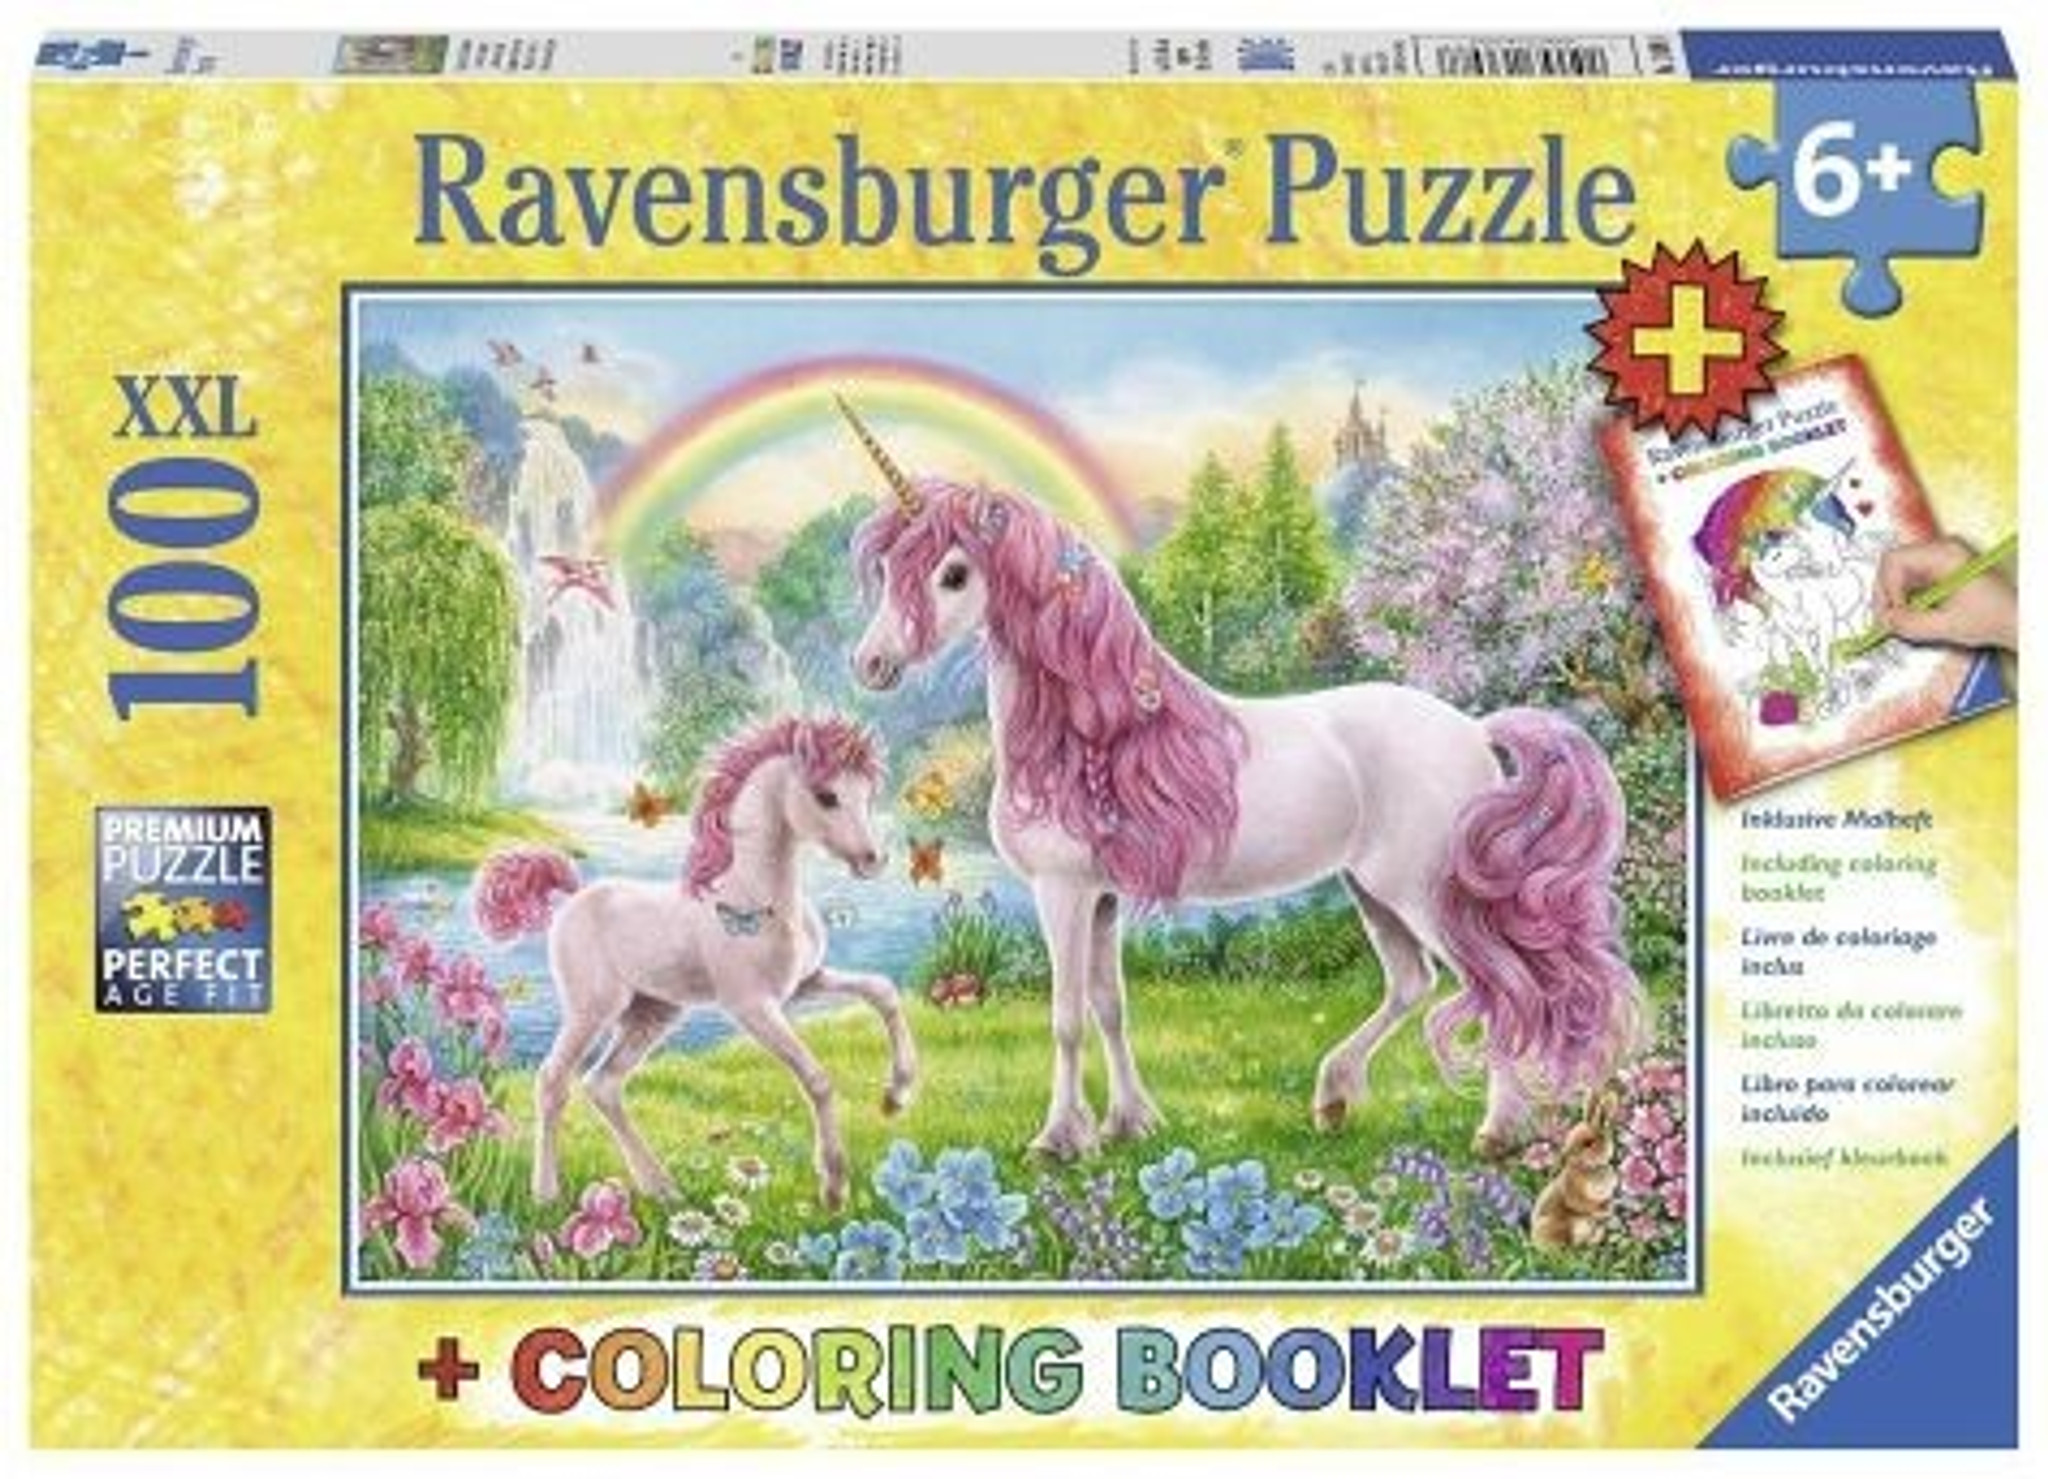  Ravensburger 4005556180837 Looky Sketch Book Small Animals :  Toys & Games